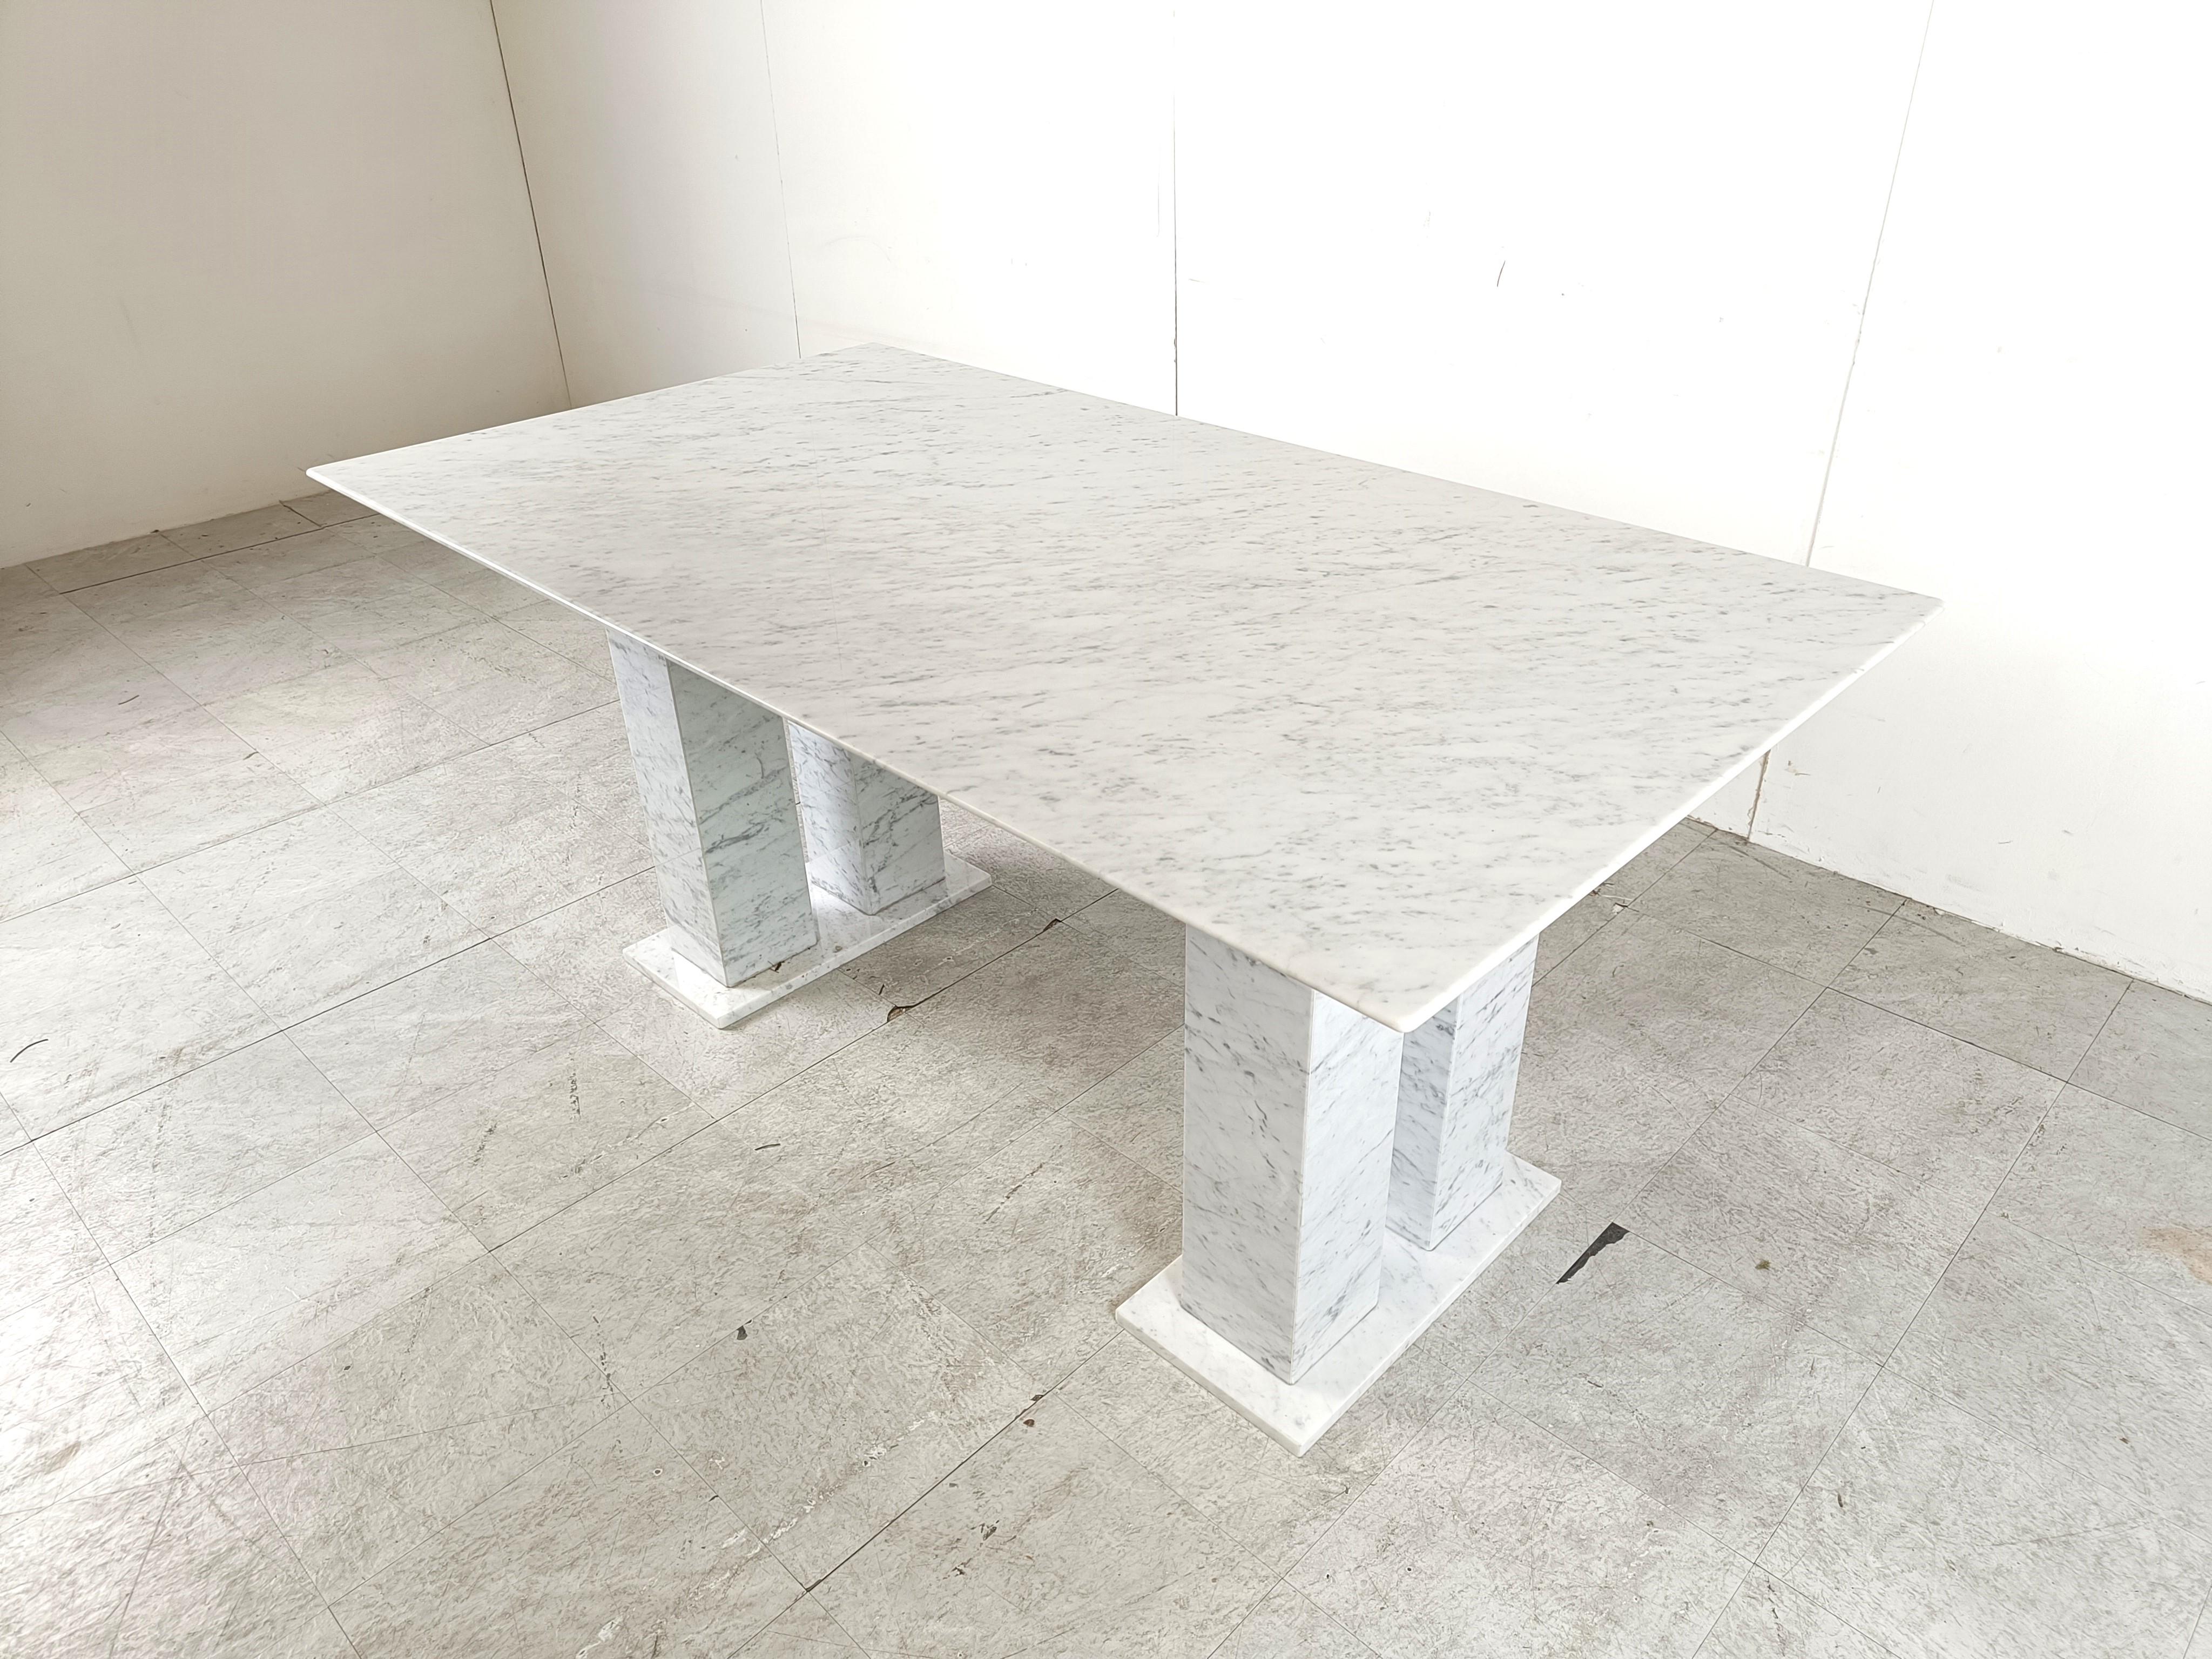 Timeless and elegant white marble dining table with double column bases on each side.

Architectural dining table with a beautiful rectangular top.

Gorgeous natural vains.

1970s - Italy

Height: 73cm/28.74